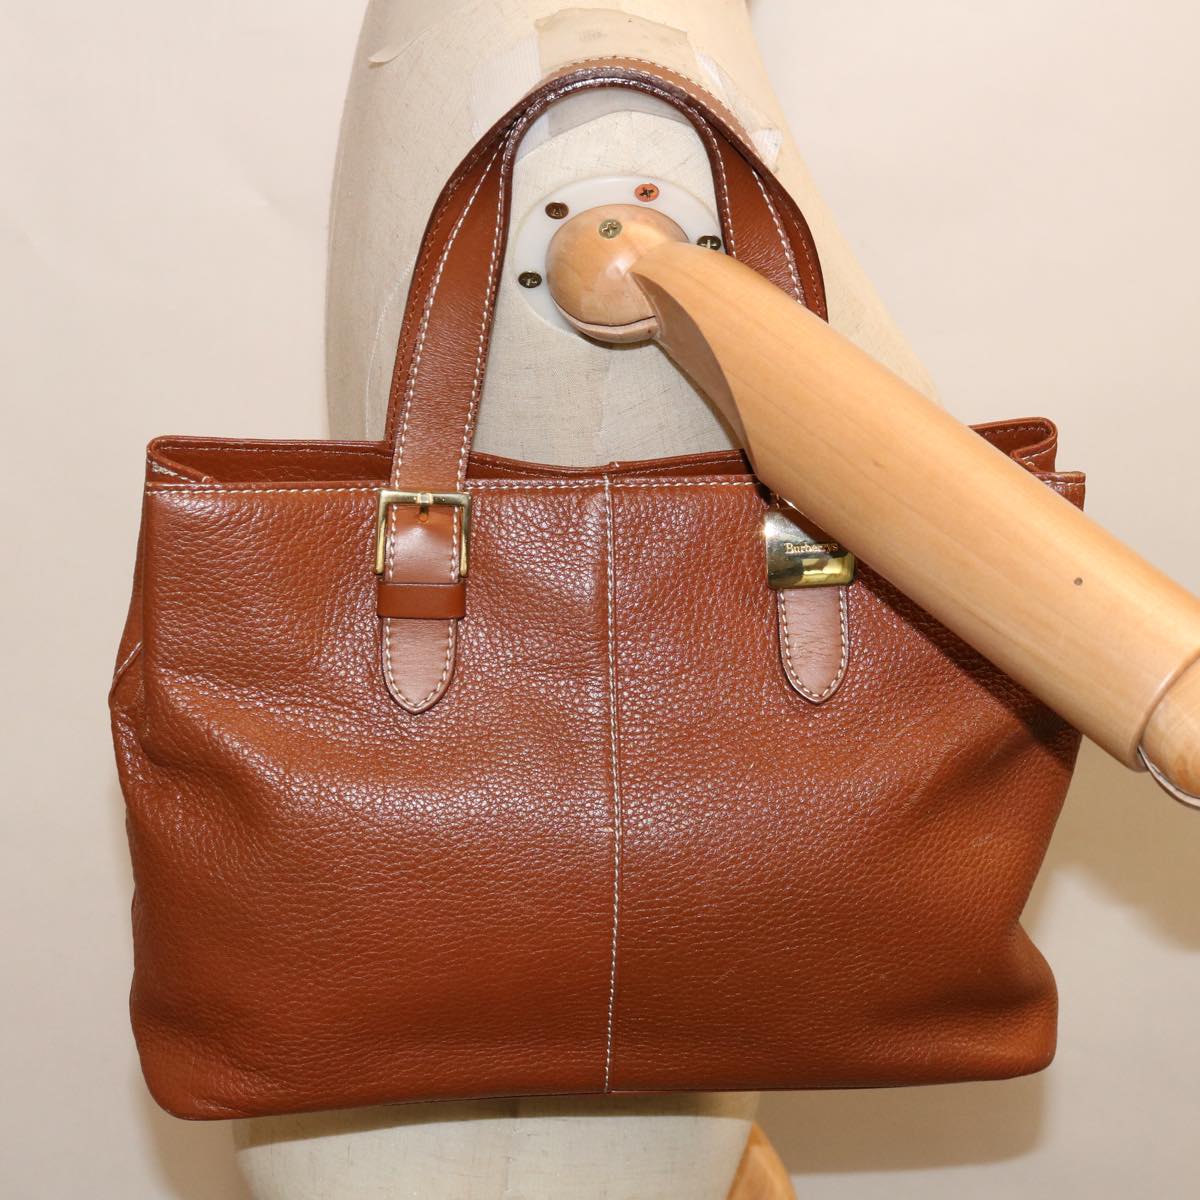 Burberrys Hand Bag Leather Brown Auth bs12032